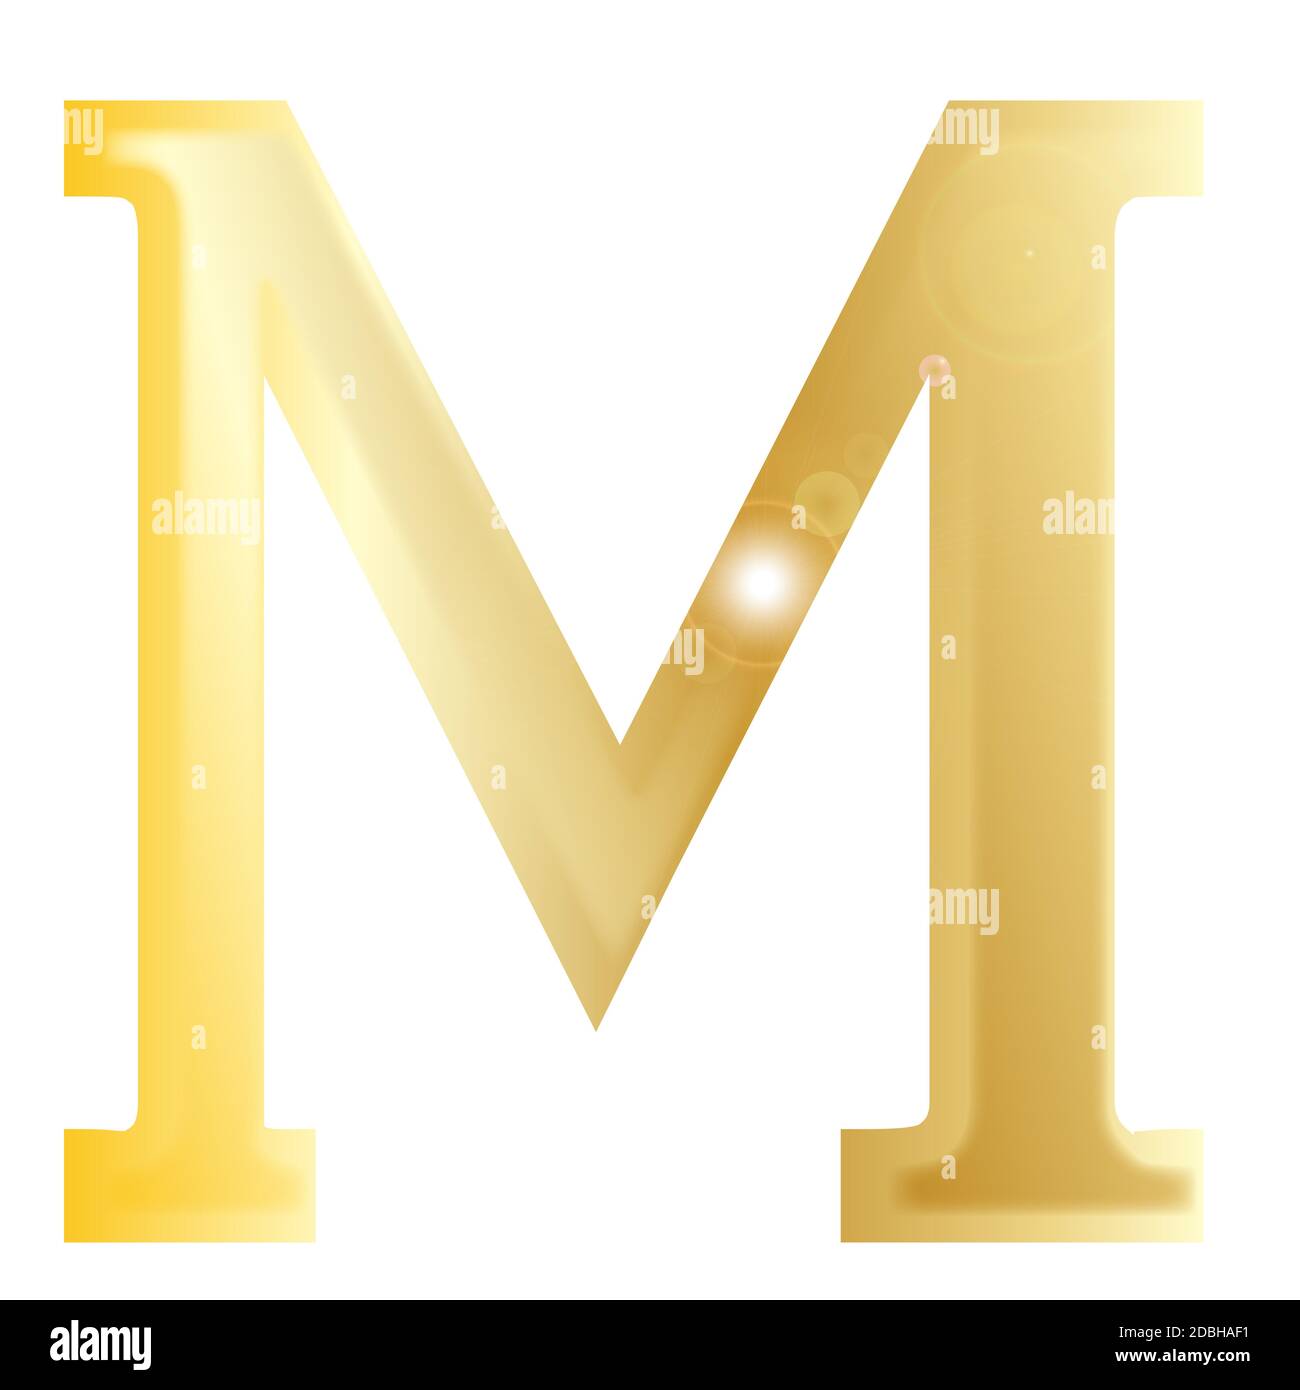 Mu - a letter from the Greek alphabet isolated over a white Background. Stock Photo